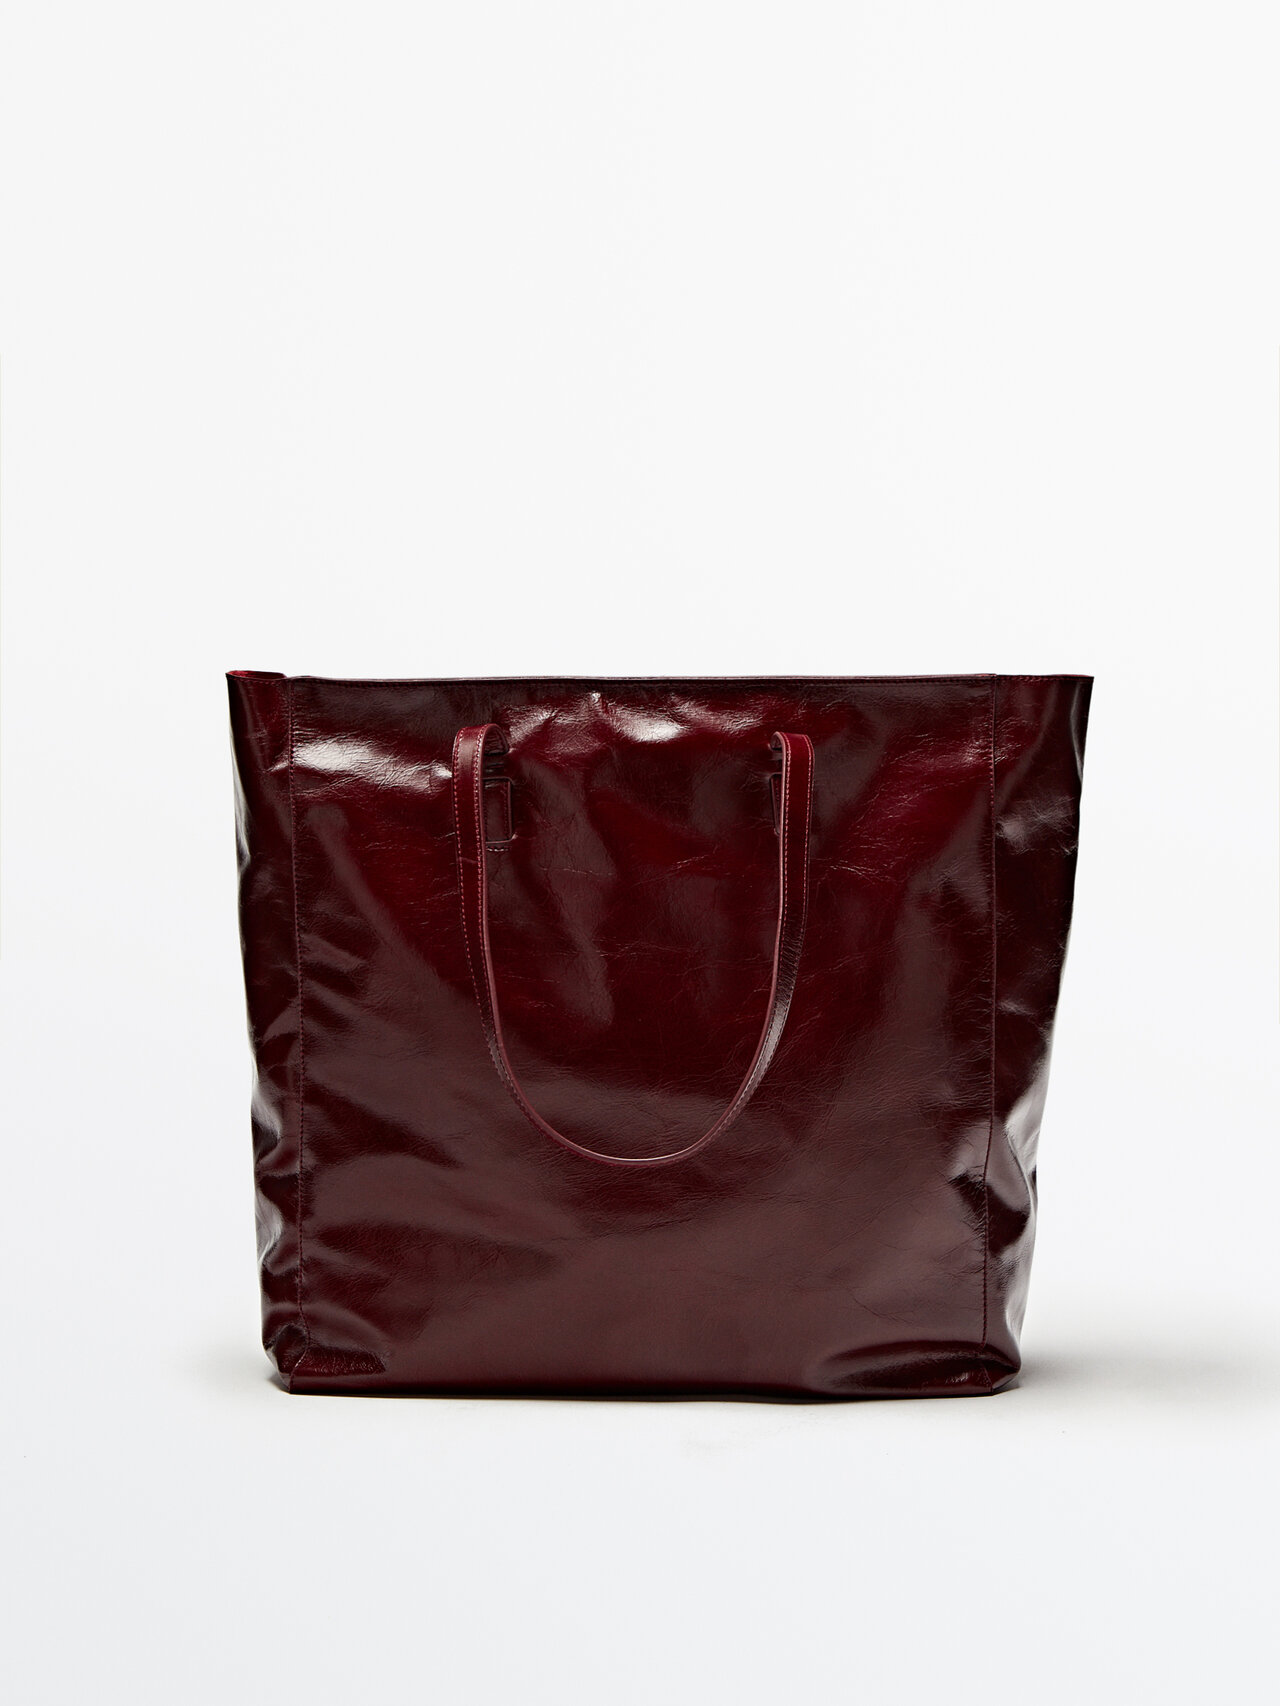 Massimo Dutti Leather Tote Bag With A Cracked Finish In Burgundy